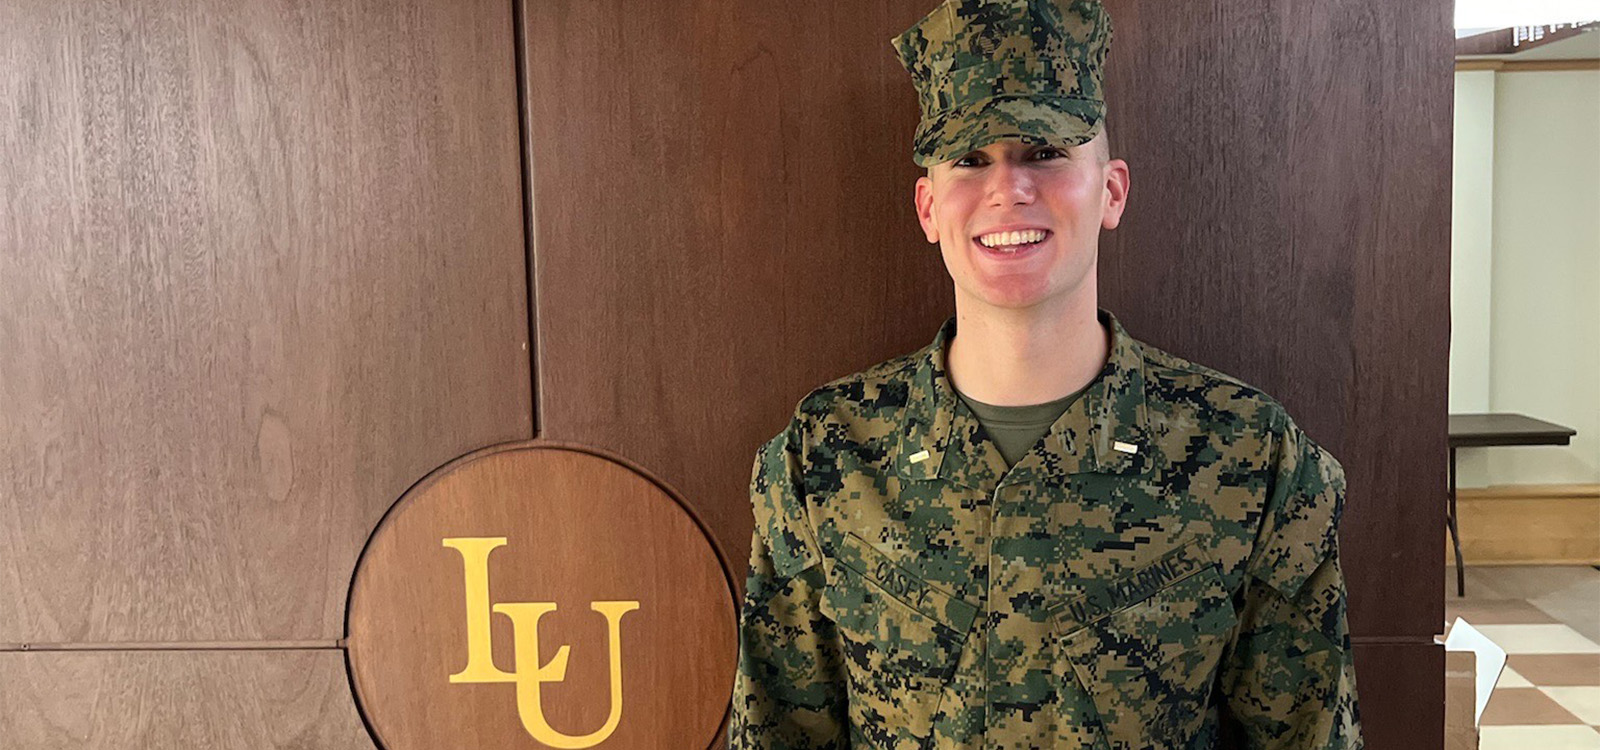 Keagan Casey wears his Army fatigues and stands next to a Lehigh logo.